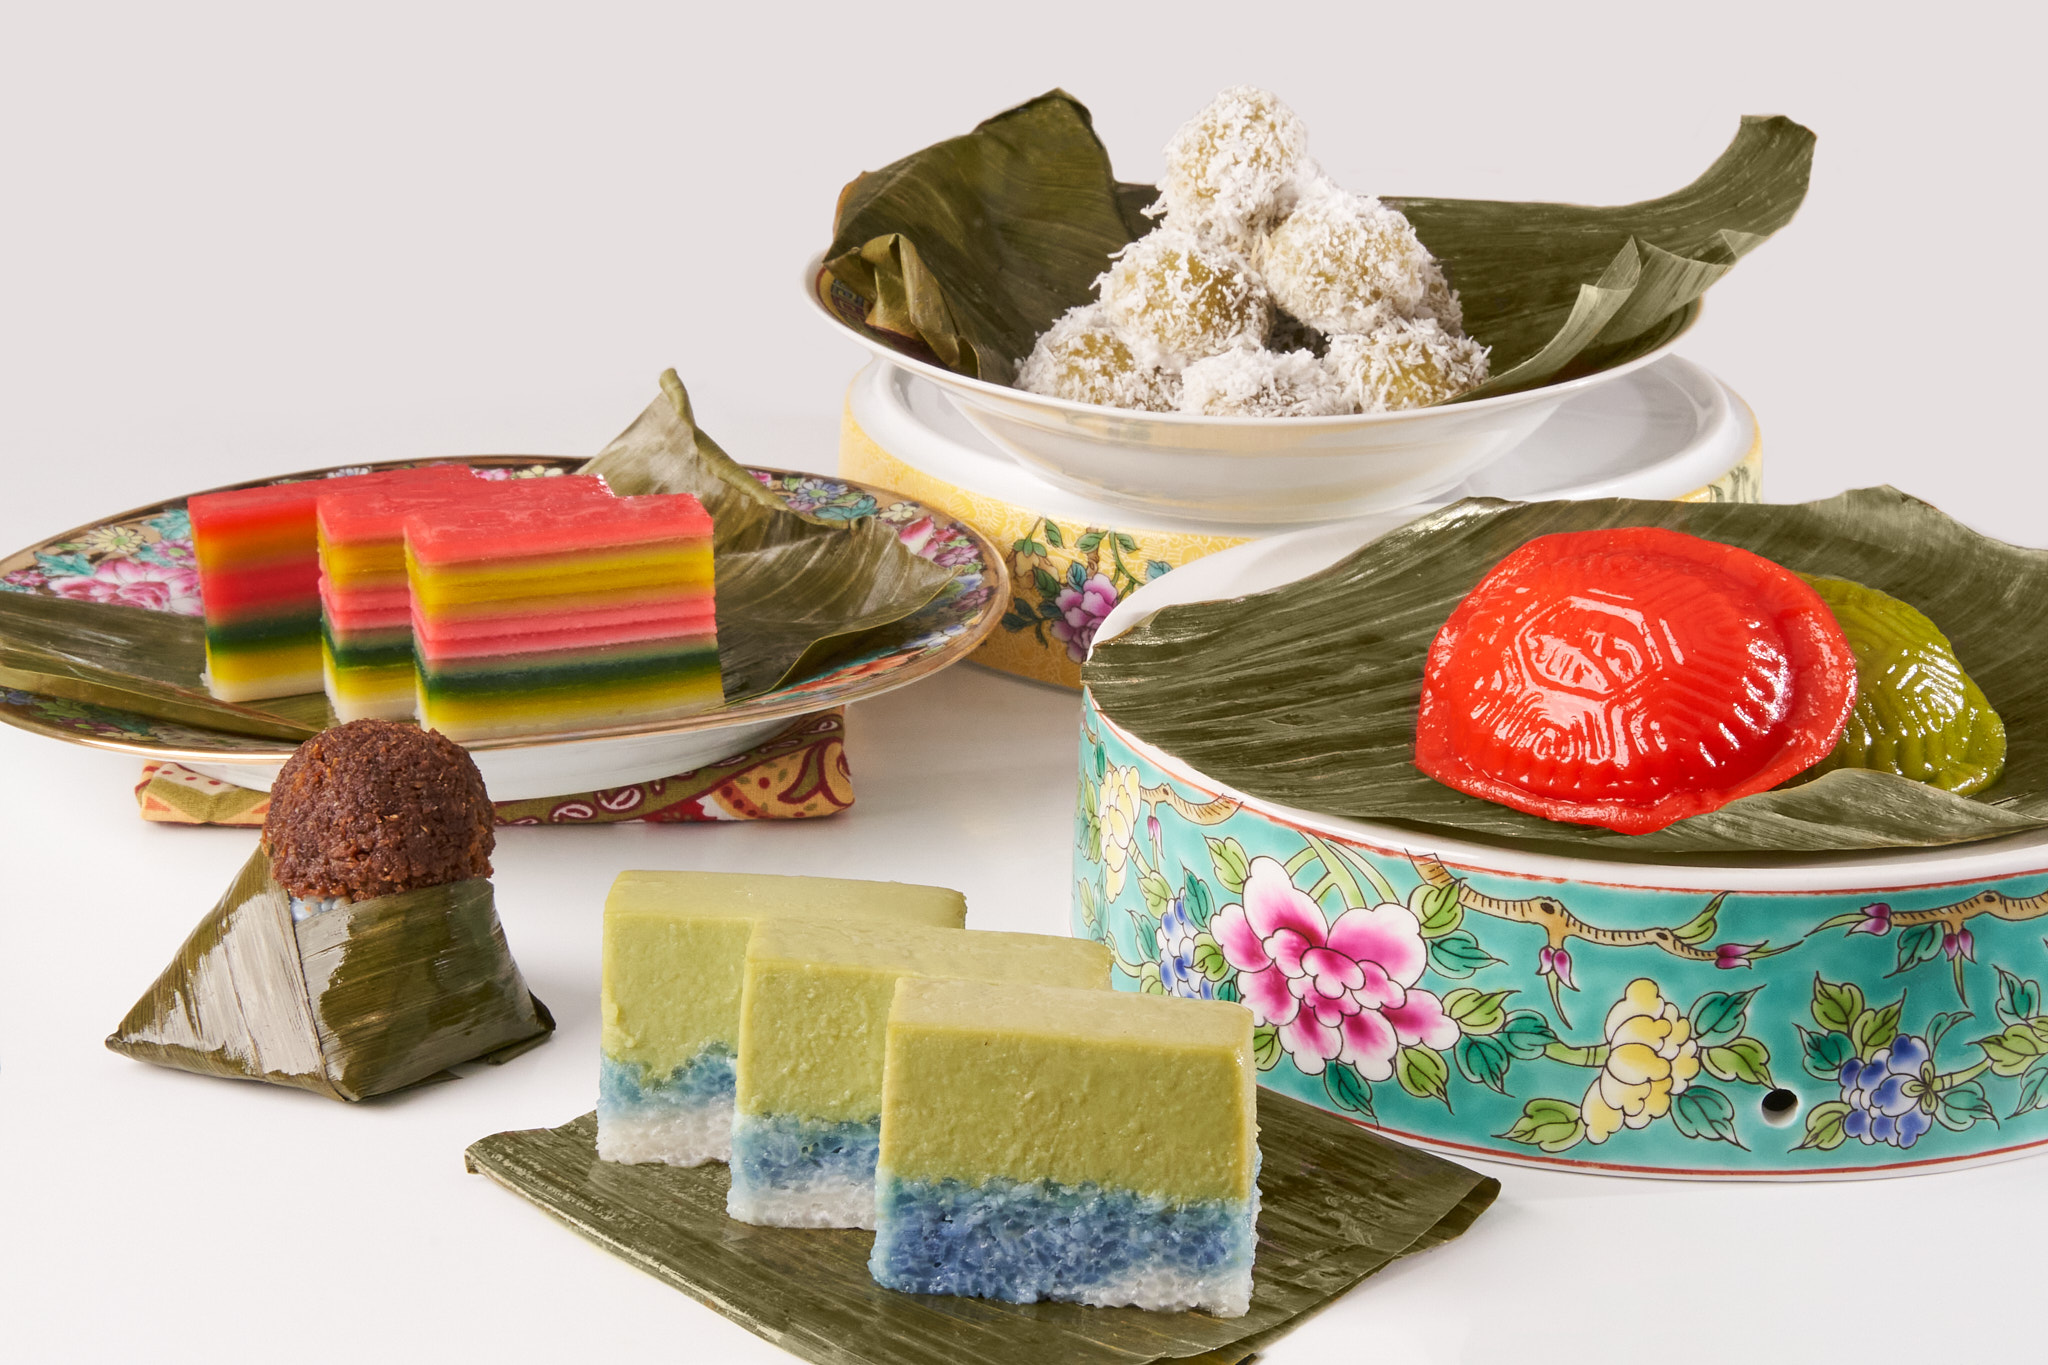 An array of colorful desserts laid out on green banana leaves and patterned platters.